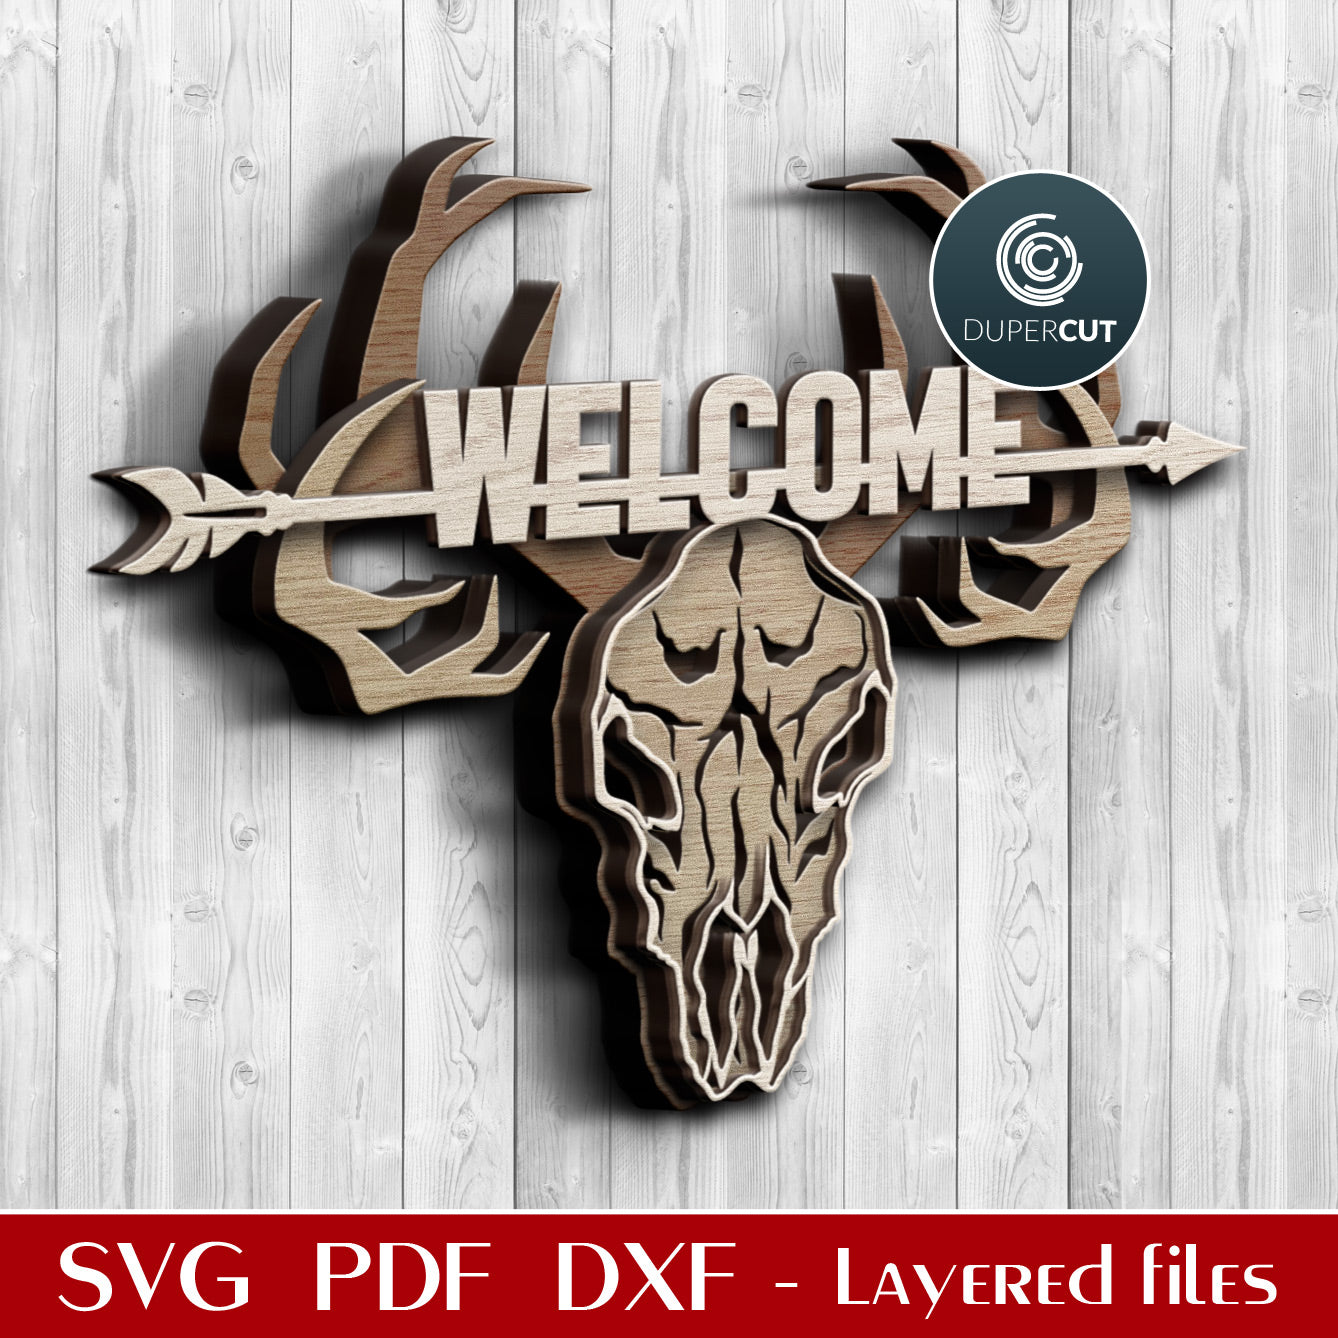 Deer skull multi layer template - SVG PDF DXF laser cutting files for Glowforge, Cricut, Silhouette Cameo, CNC plasma machines by DuperCut